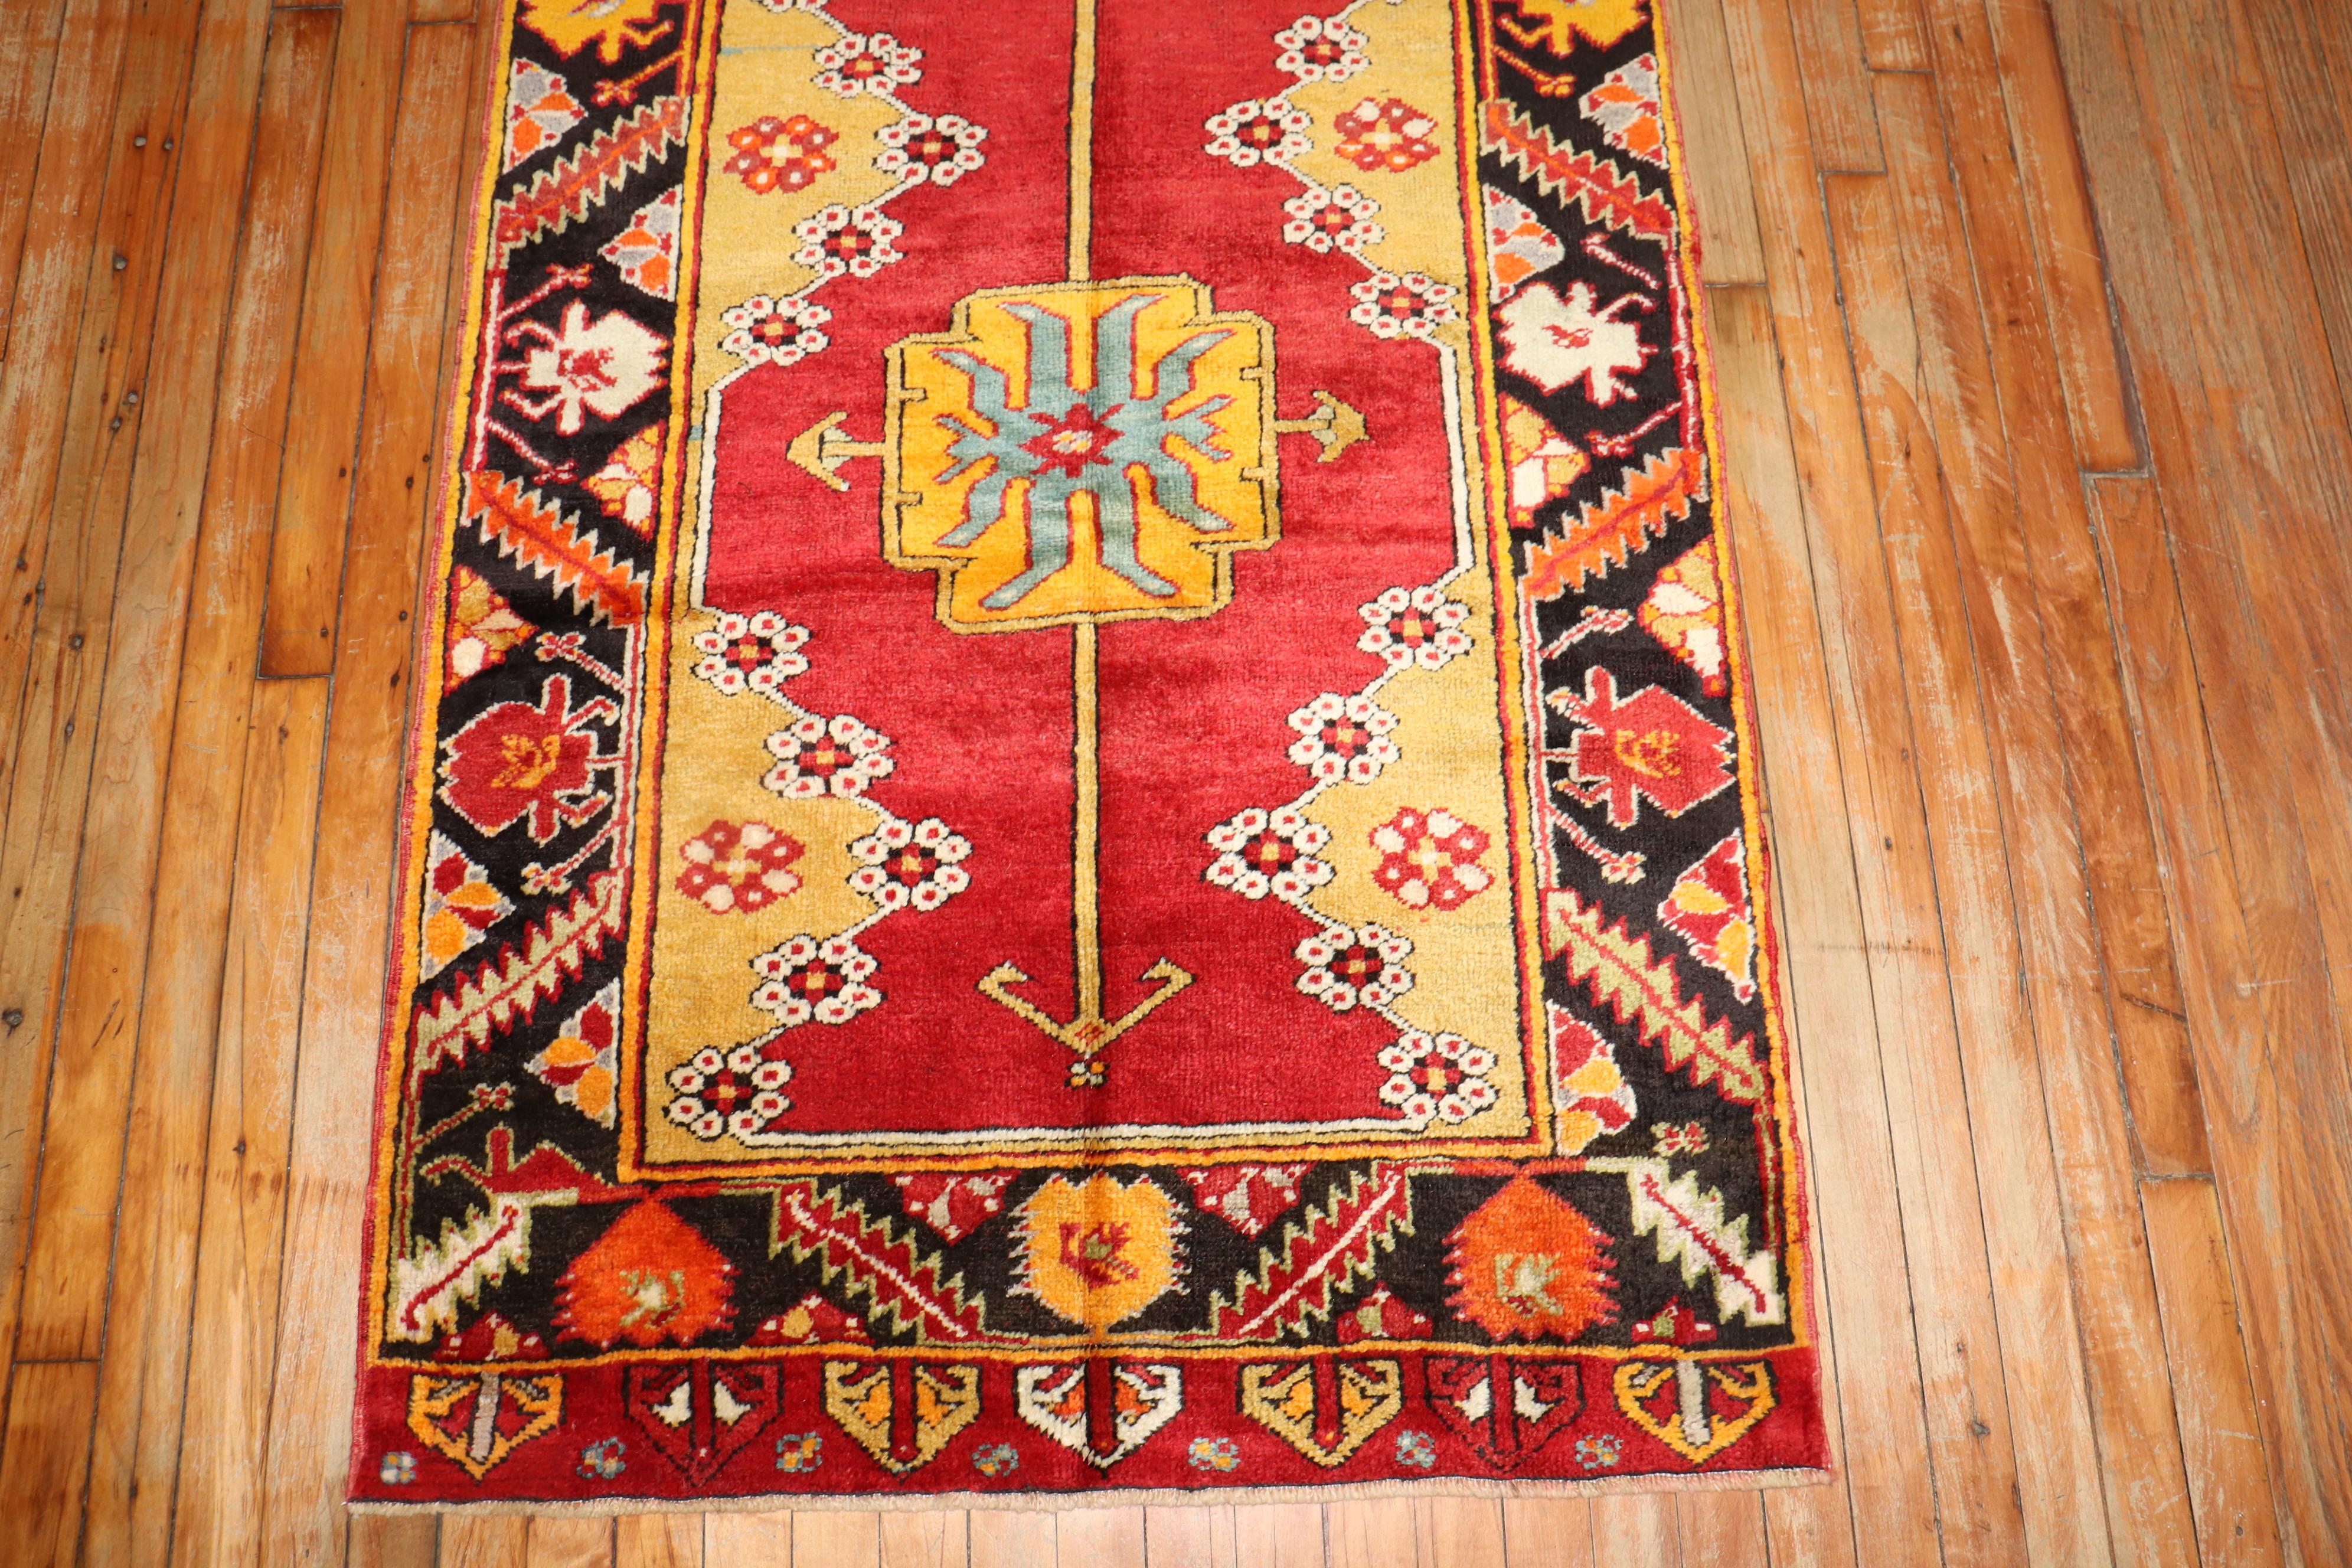 An early 20th century rich vibrant color turkish karapinar runner.

Measures: 3'2'' x 13'.